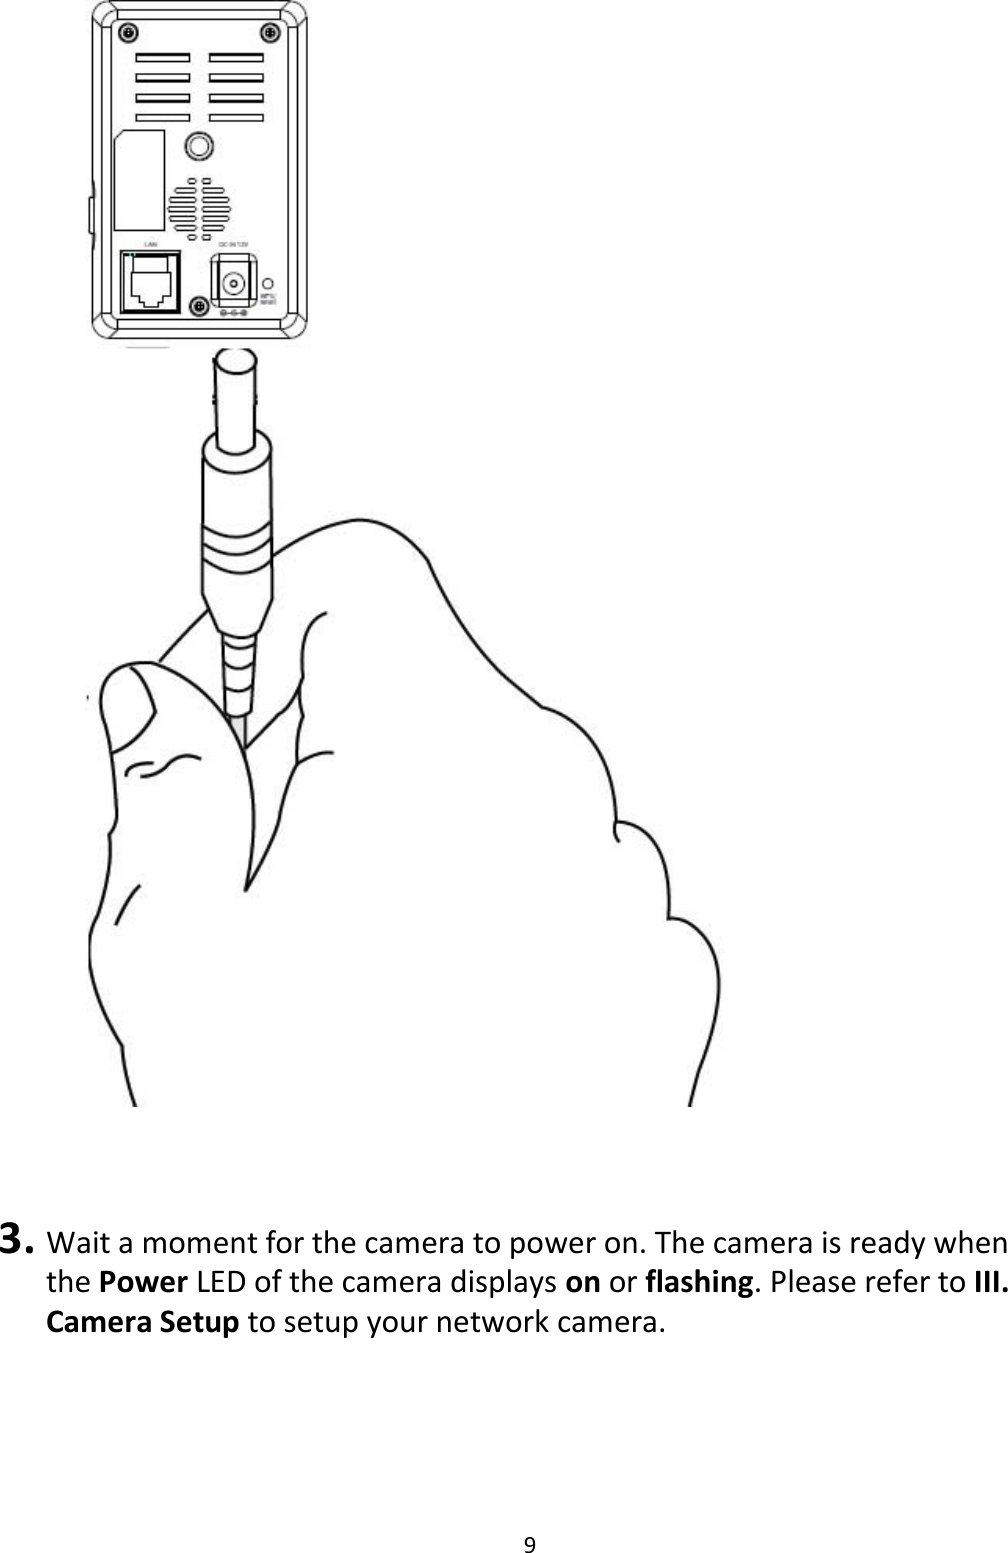 9      3. Wait a moment for the camera to power on. The camera is ready when the Power LED of the camera displays on or flashing. Please refer to III. Camera Setup to setup your network camera.  